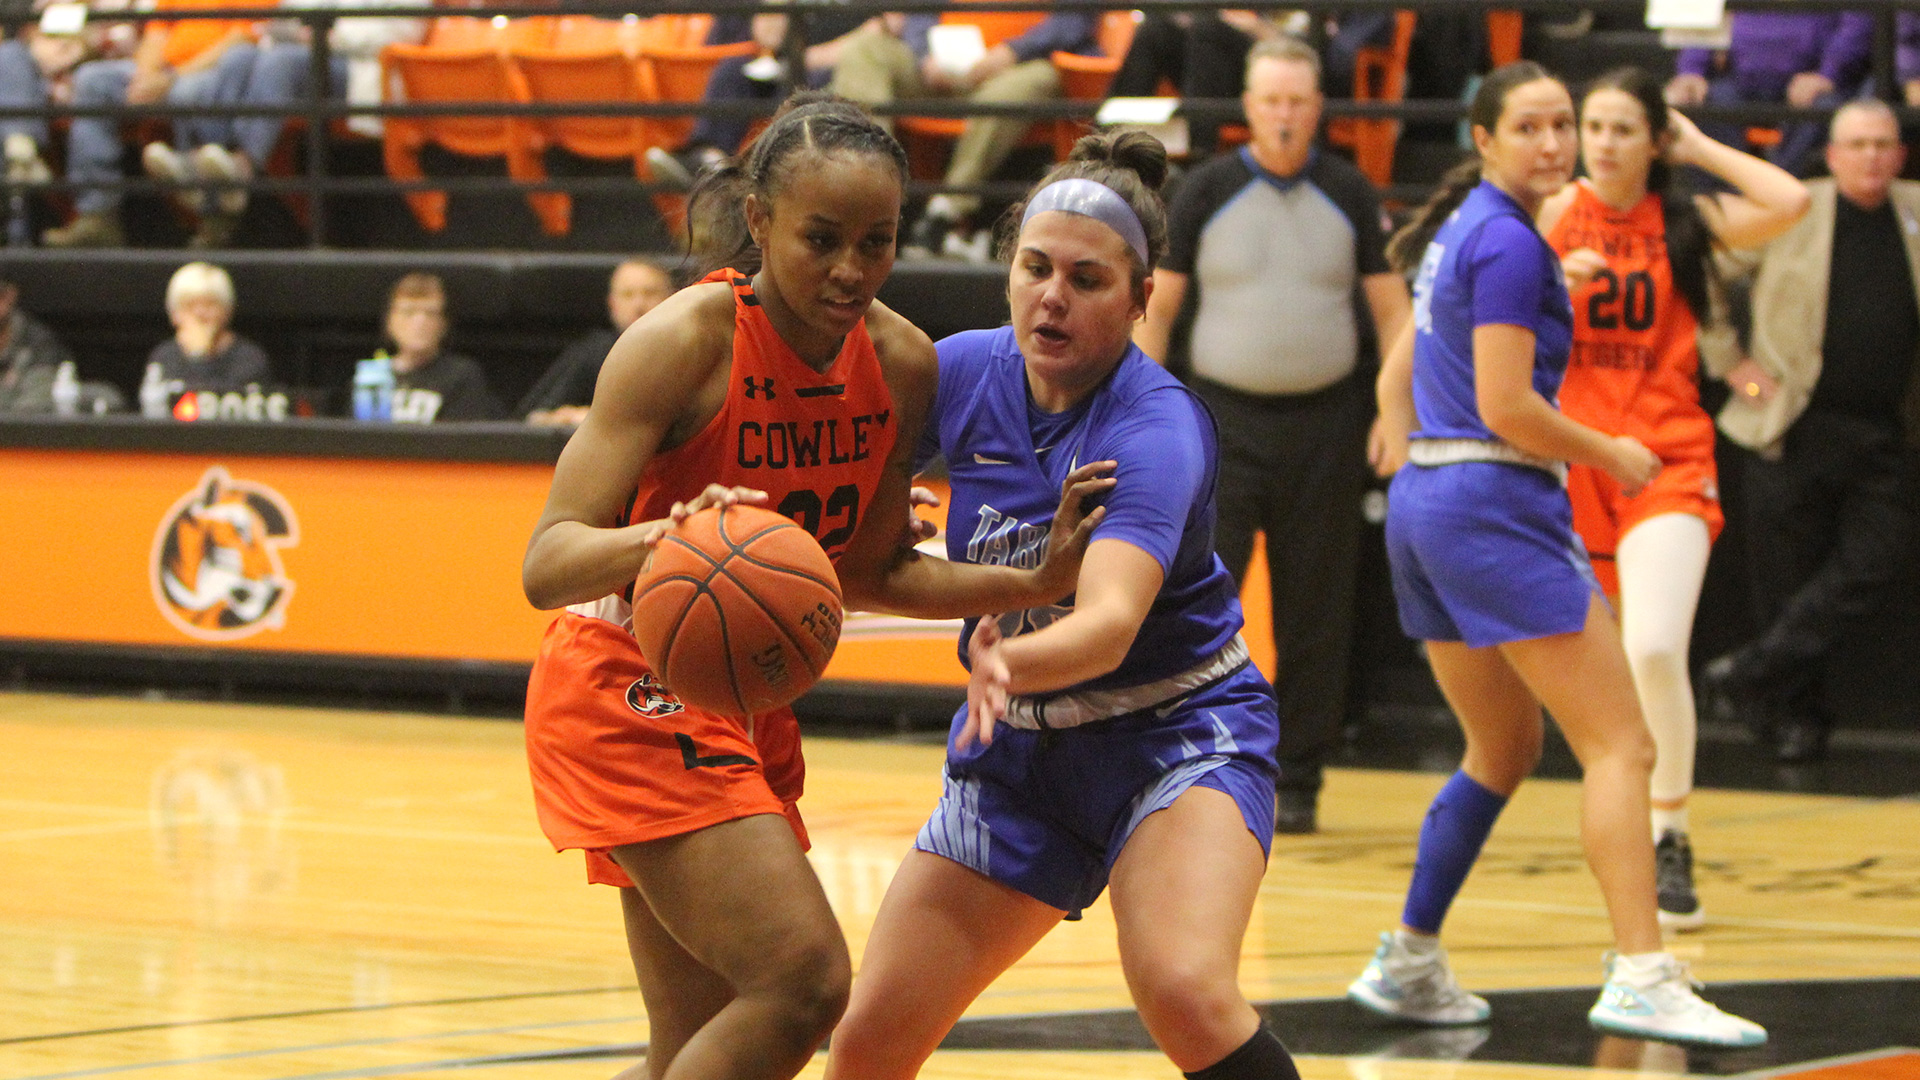 Lady Tigers split a pair of home basketball games